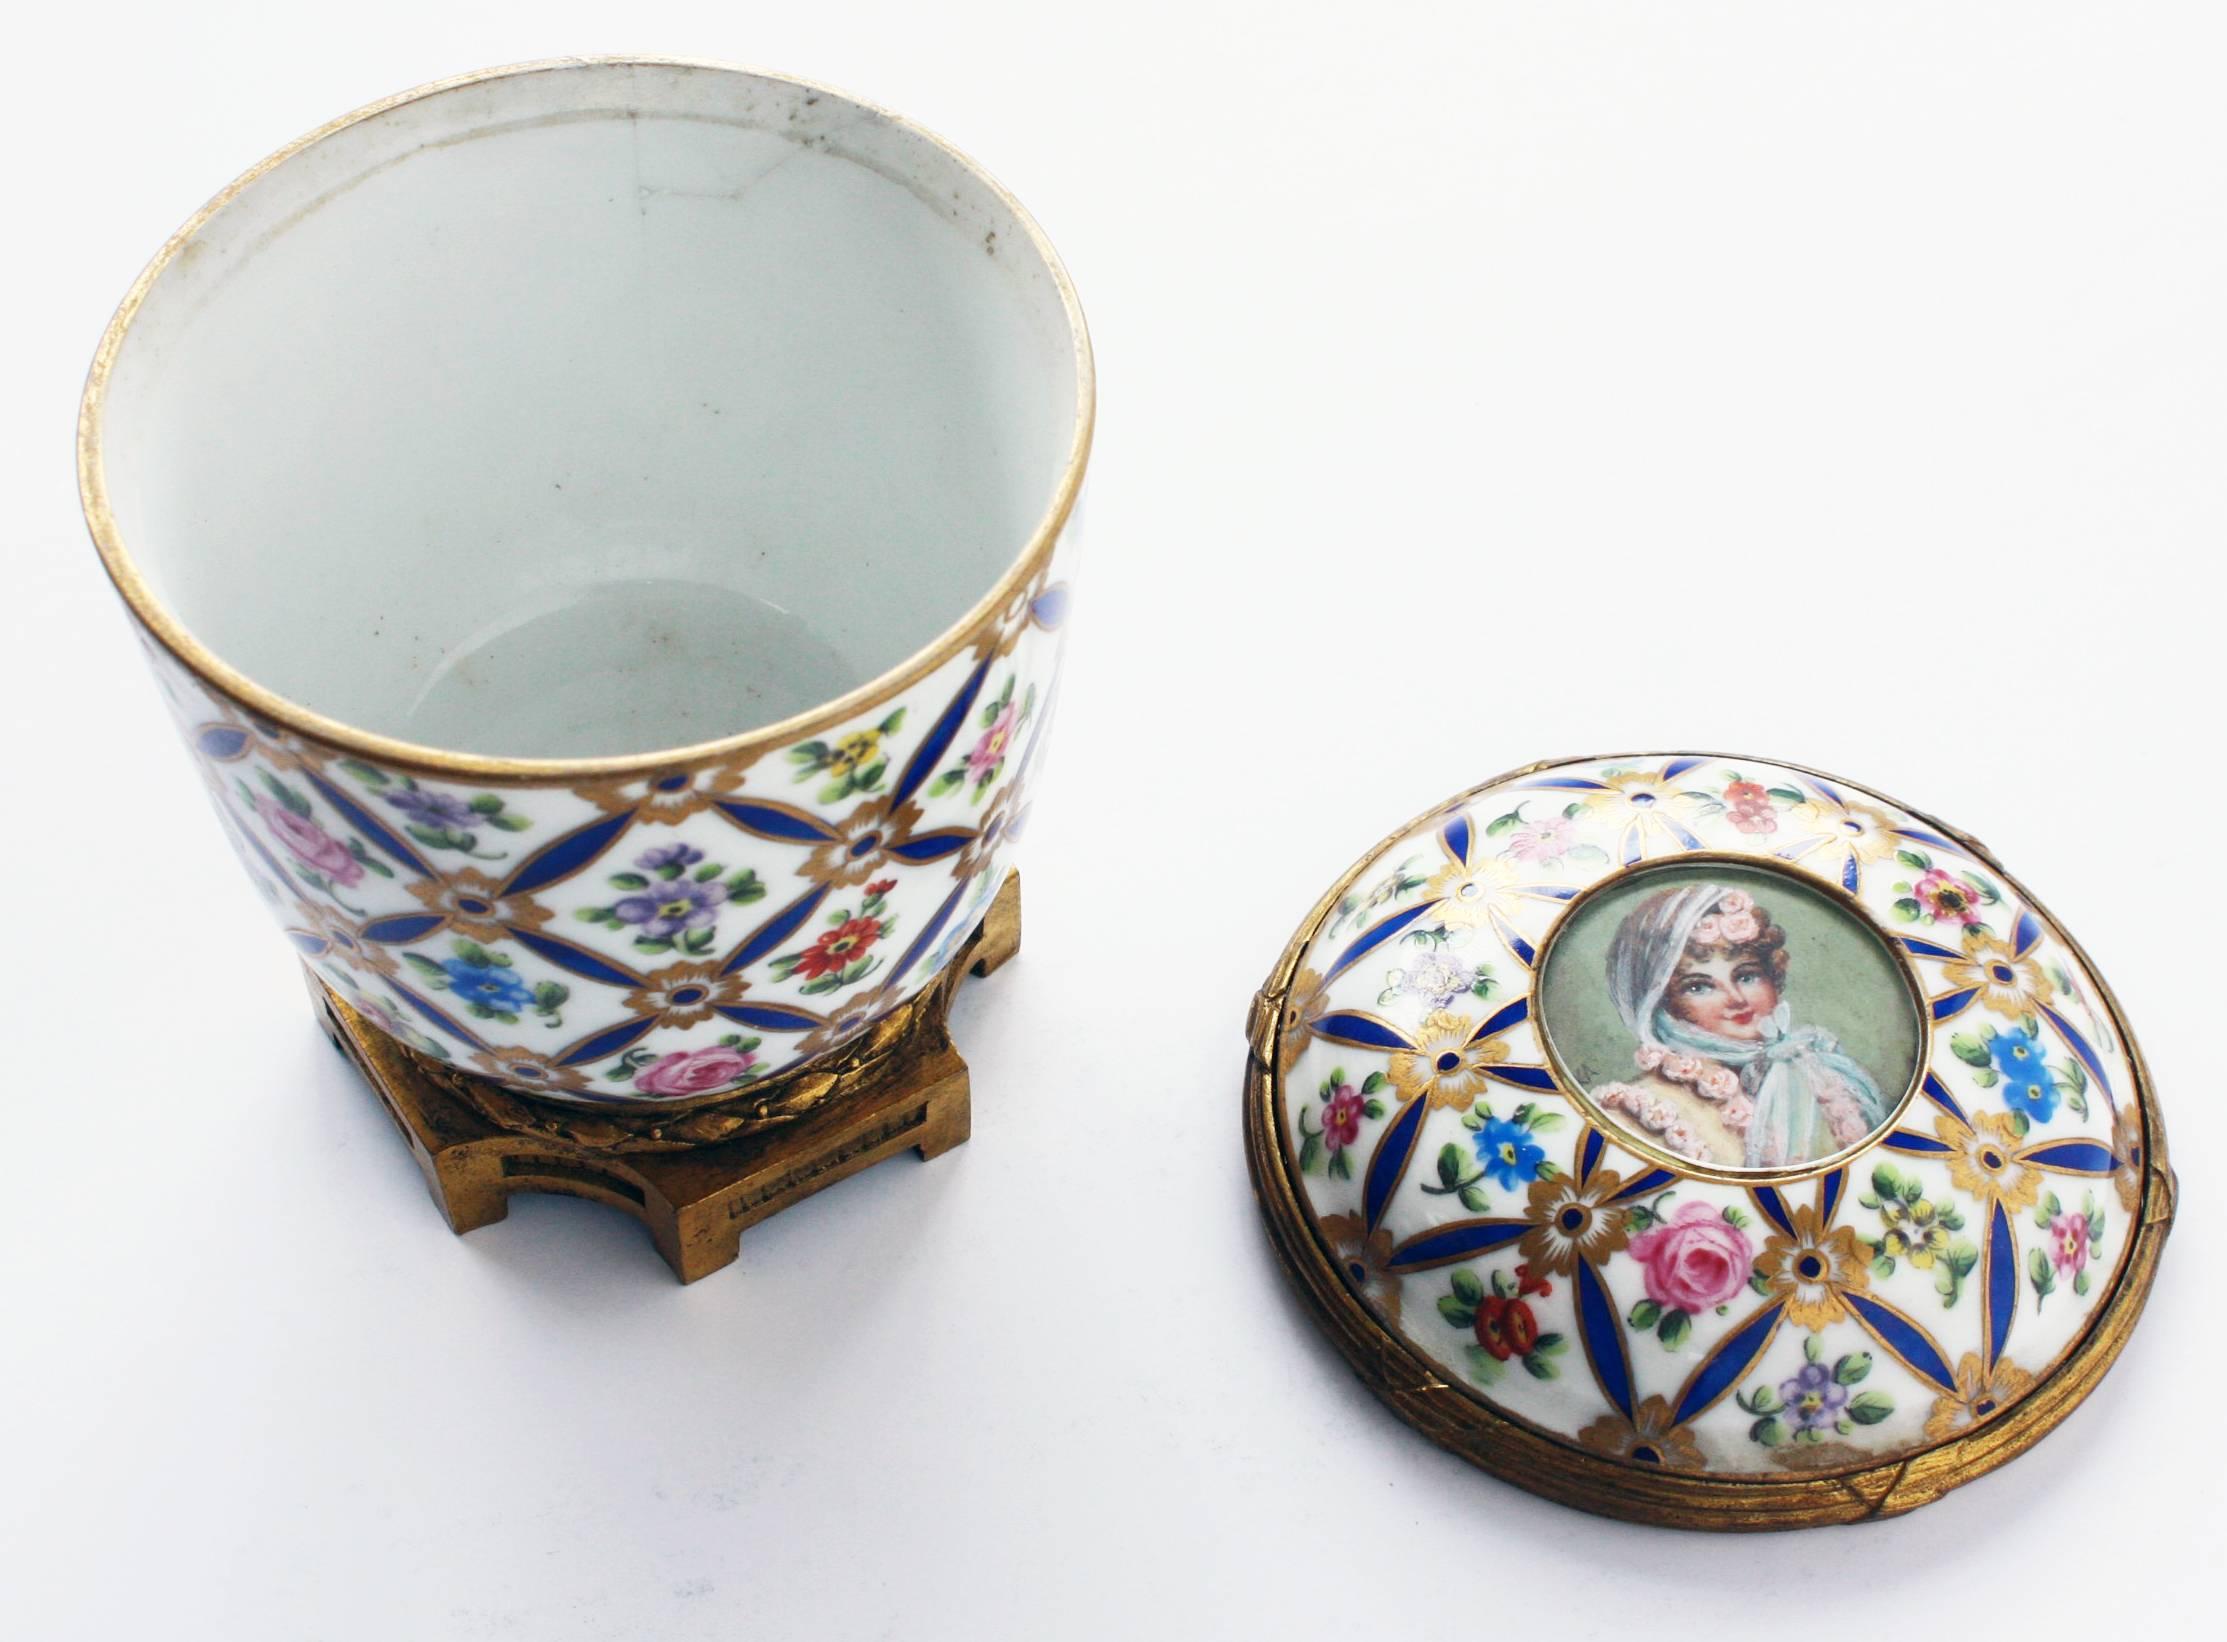 a porcelain covered jar with overall floral enamel-like pattern and gold accents. On the lid is a portrait signed 